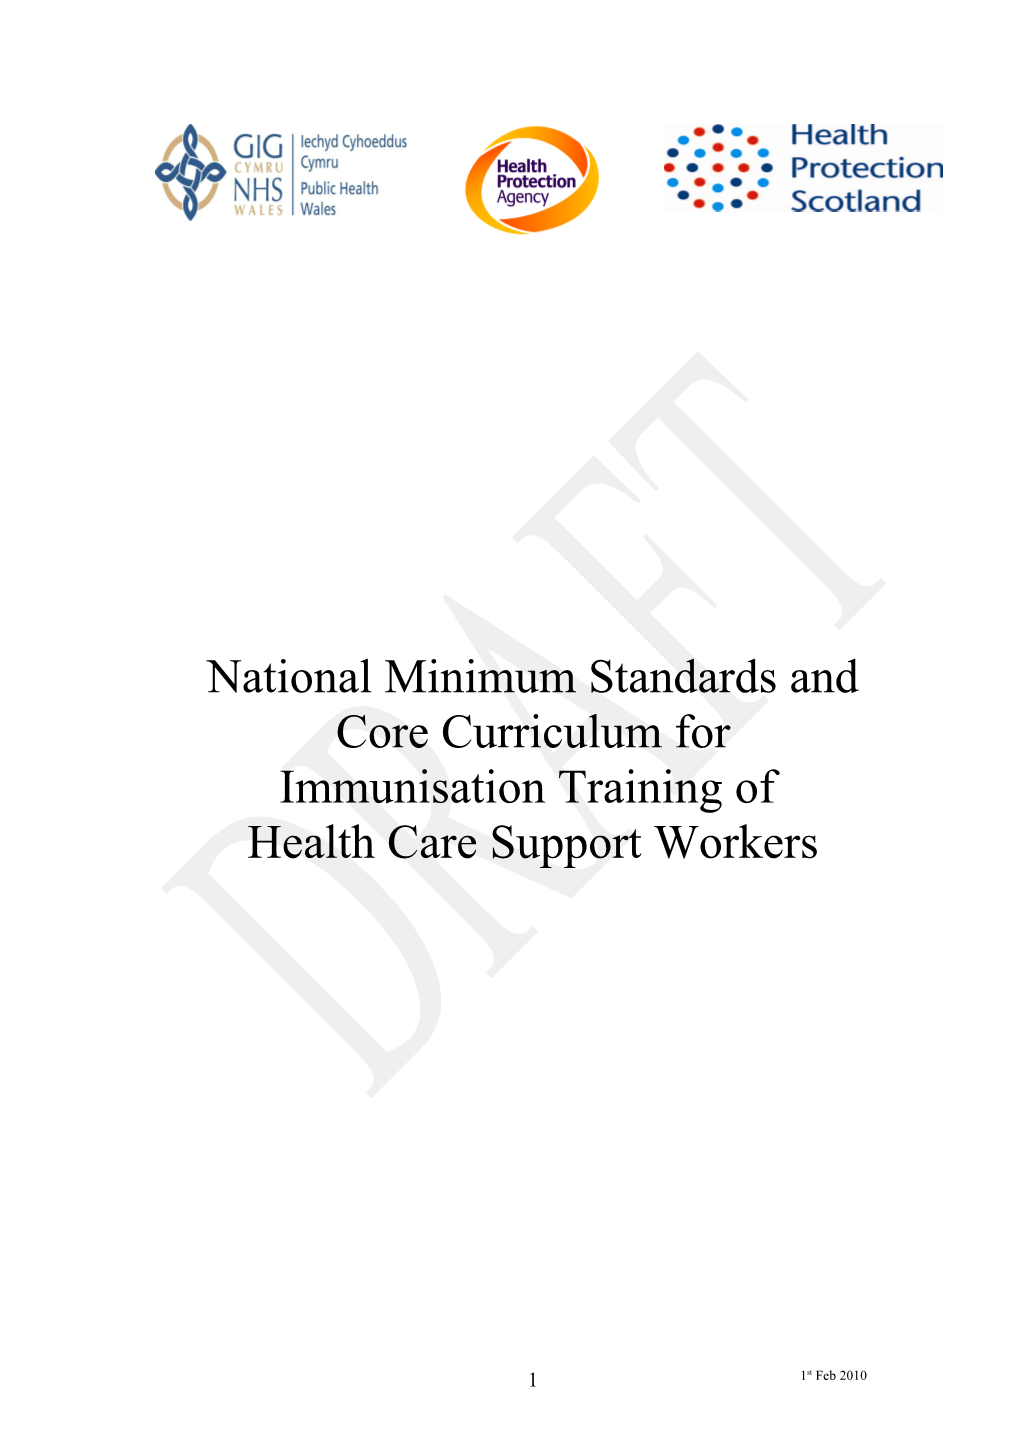 National Minimum Standards and Core Curriculum For